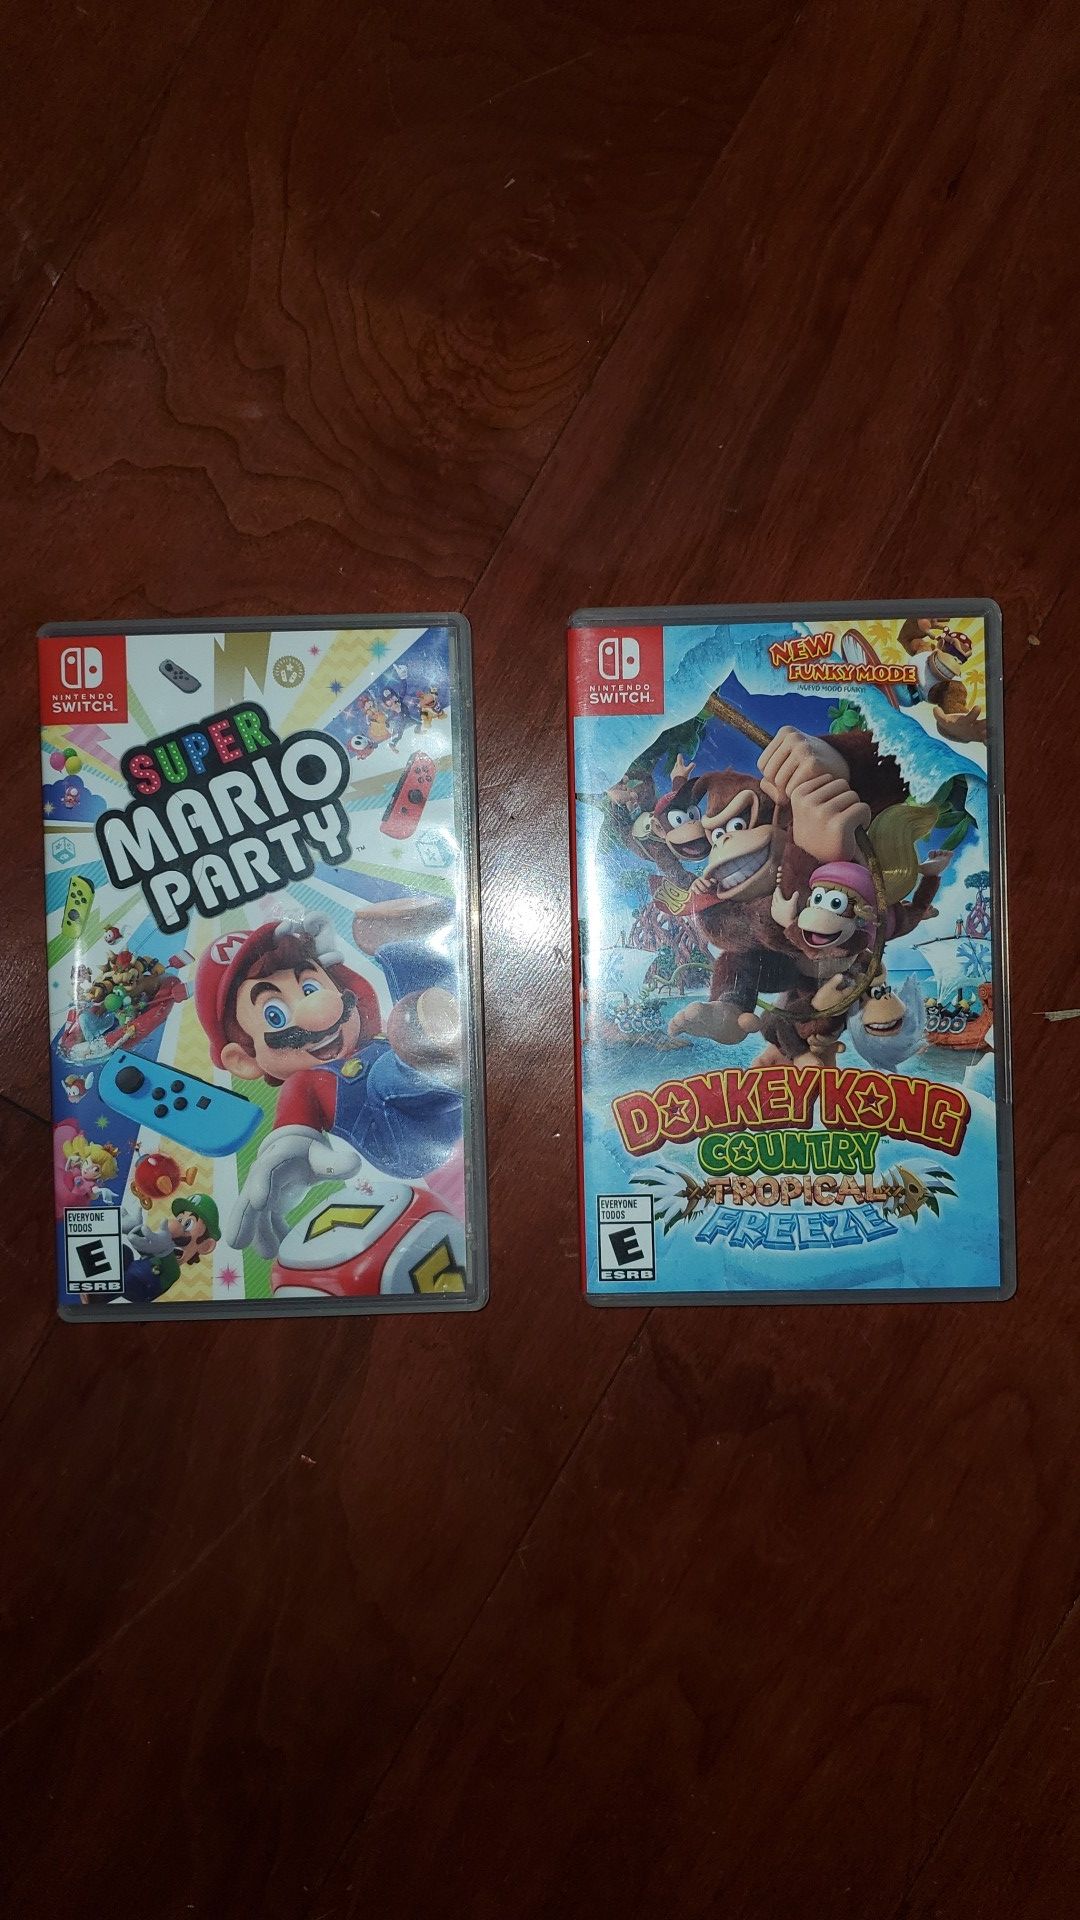 two games of Nintendo switch Donkey Kong country Super Mario Party